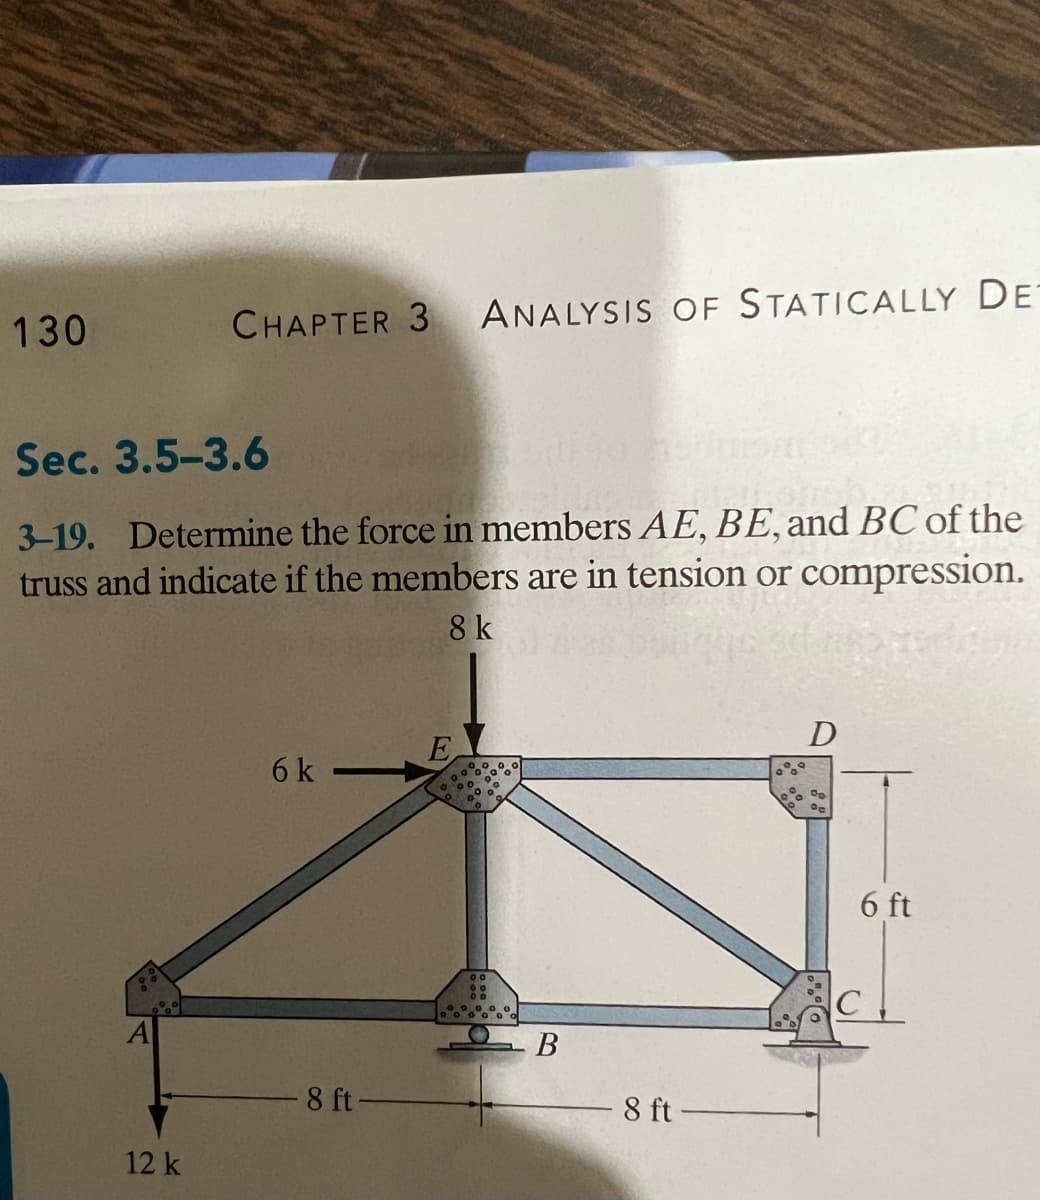 130
CHAPTER 3 ANALYSIS OF STATICALLY DE
Sec. 3.5-3.6
3-19. Determine the force in members AE, BE, and BC of the
truss and indicate if the members are in tension or compression.
8 k
12 k
6 k
8 ft-
E
09
00
OD
00000
B
8 ft
D
%
OC
6 ft
C